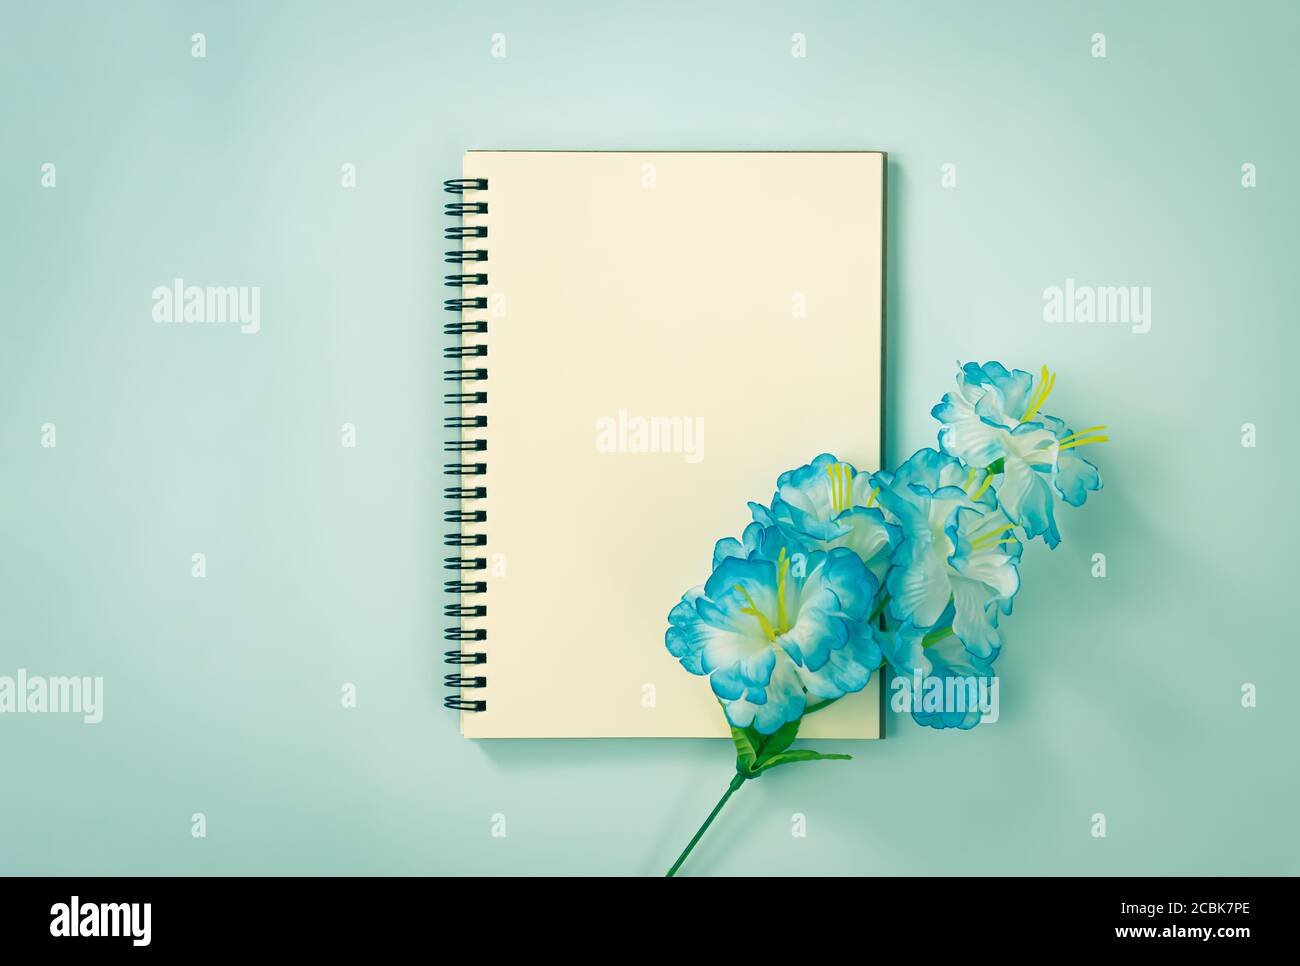 Spiral Notebook or Spring Notebook in Unlined Type and Blue Flowers at Bottom Right on Blue Pastel Minimalist Background. Spiral Notebook Mockup on Ce Stock Photo